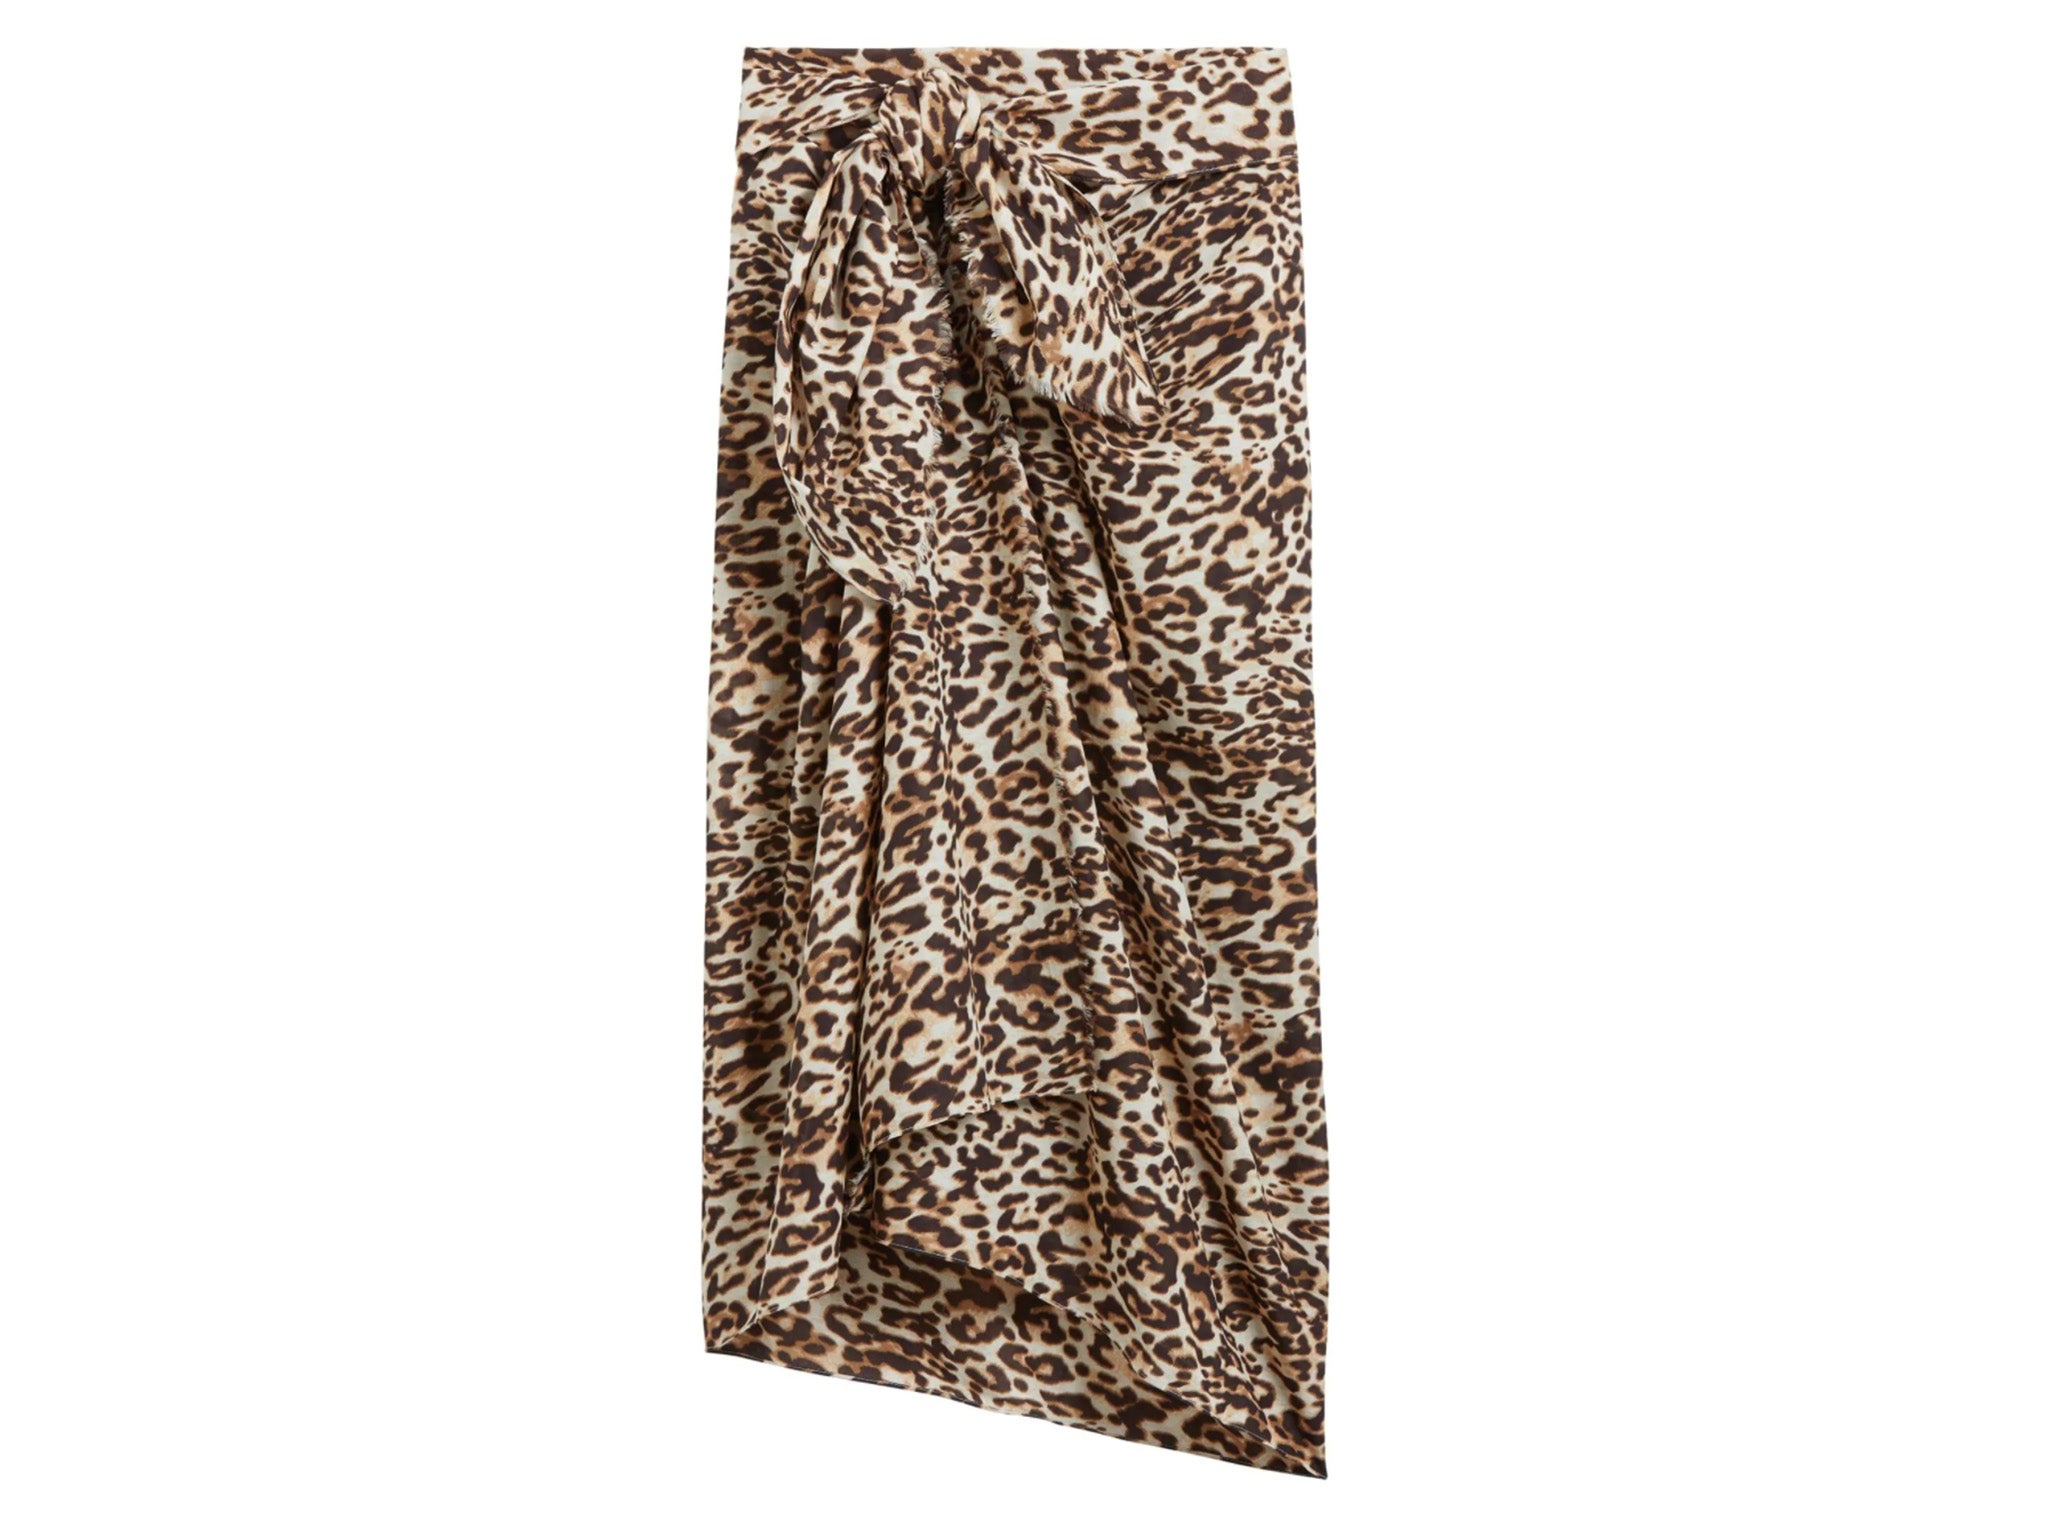 Let this leopard print sarong do all the talking by pairing it with a black bikini